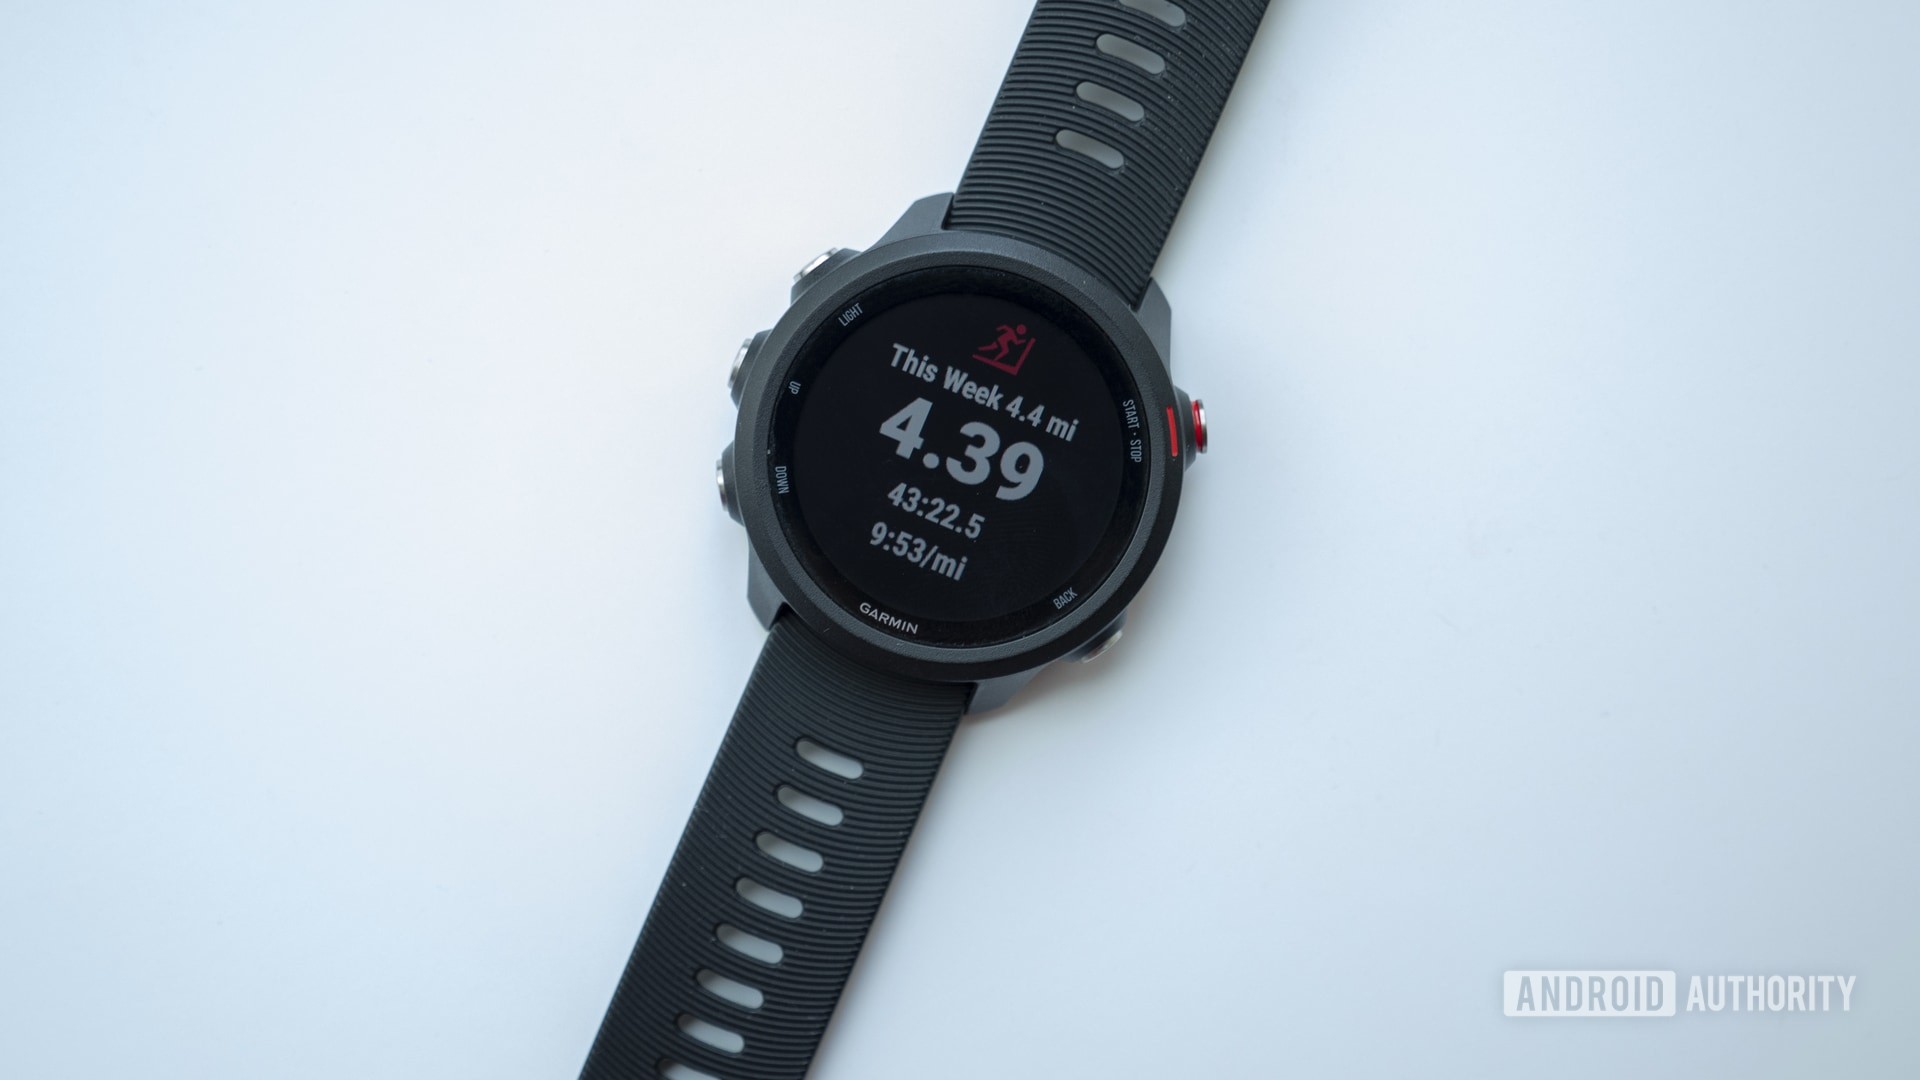 A Garmin Forerunner 245 Music running watch rests on a white surface displaying its activities screen.